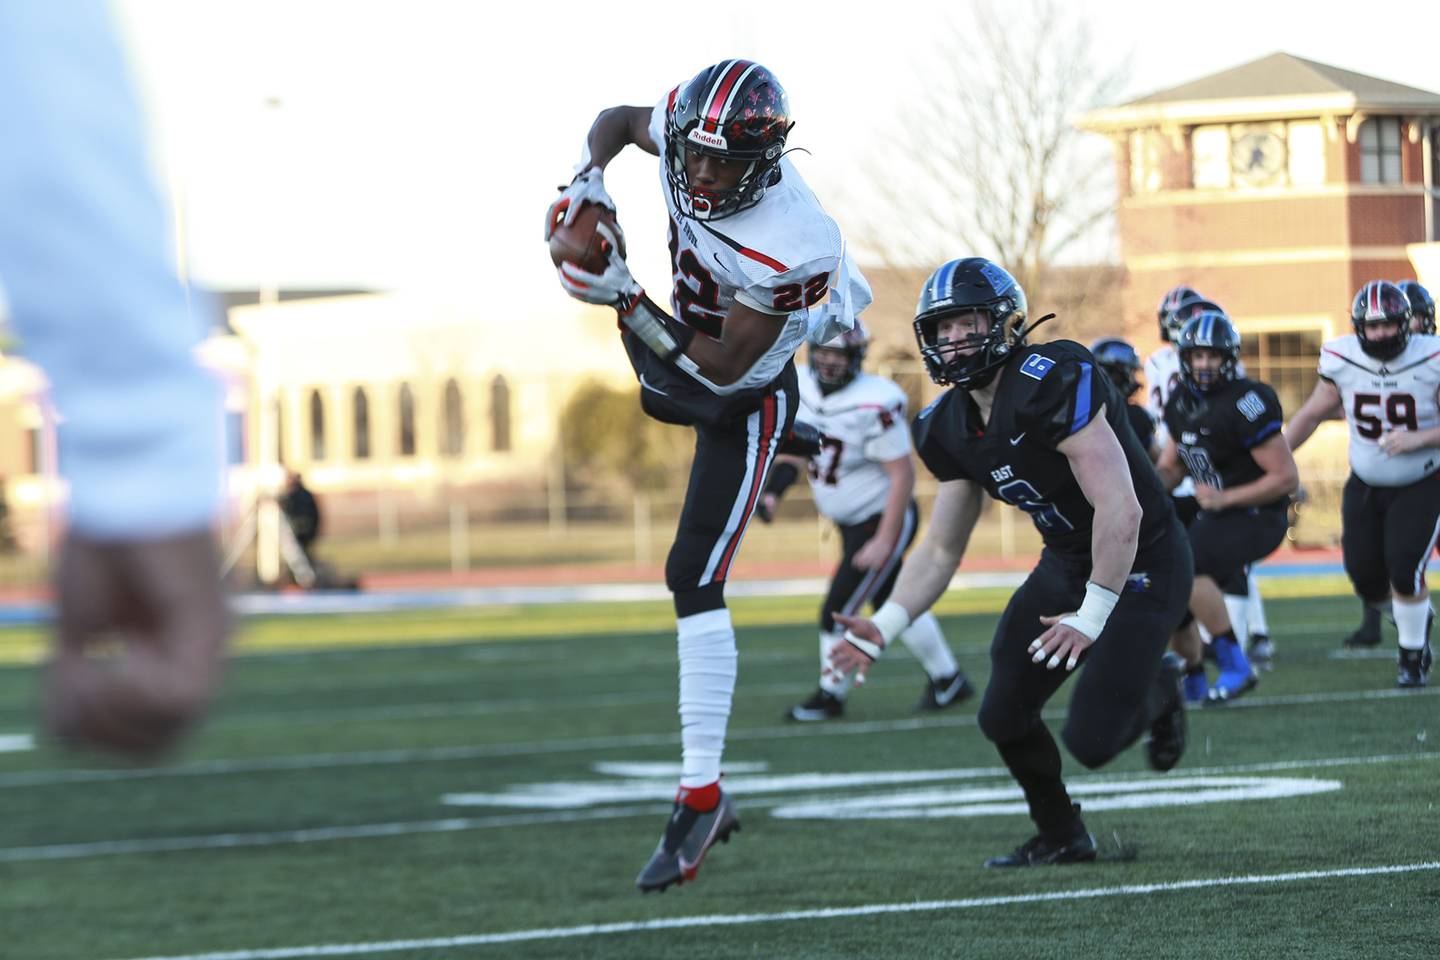 Bolingbrook's Kyan Berry-Johnson makes a catch on Friday, March 19, 2021, at Lincoln-Way East High School in Frankfort, Ill. The Griffins defeated the Raiders 42-14.